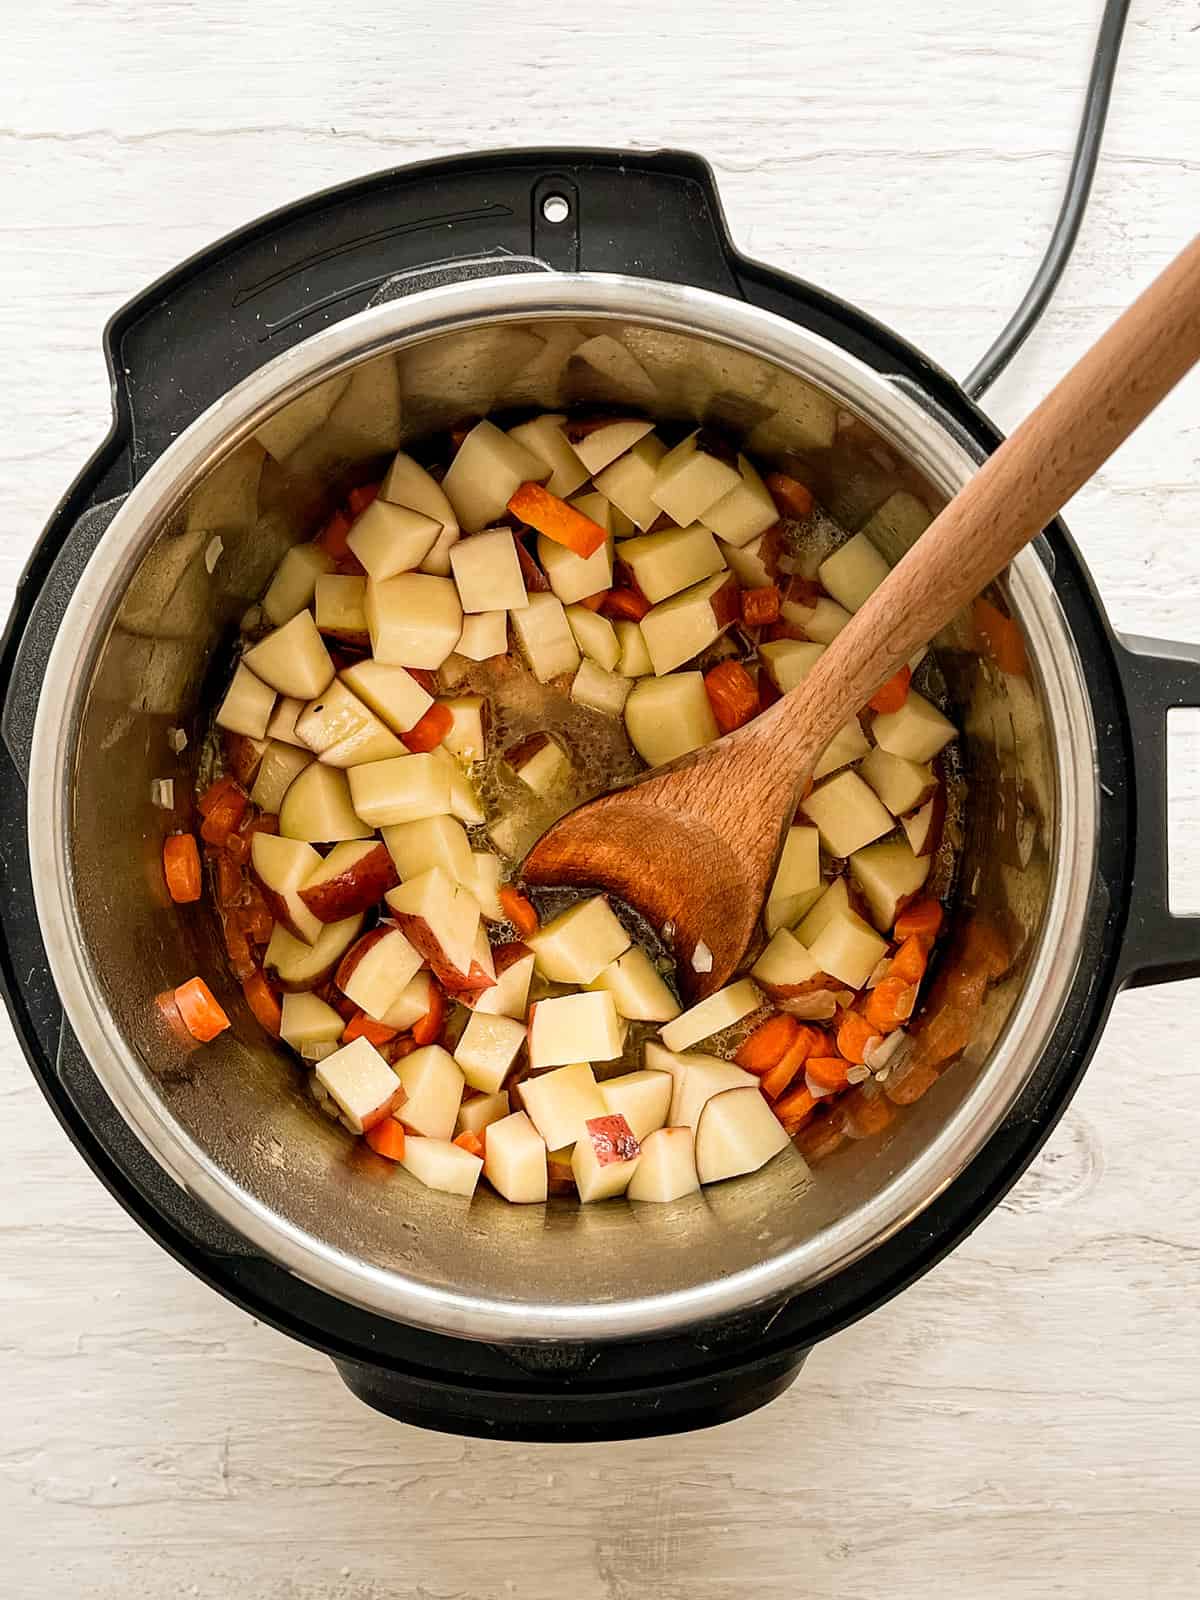 red potatoes, carrots, and onions being sauteed in Instant Pot